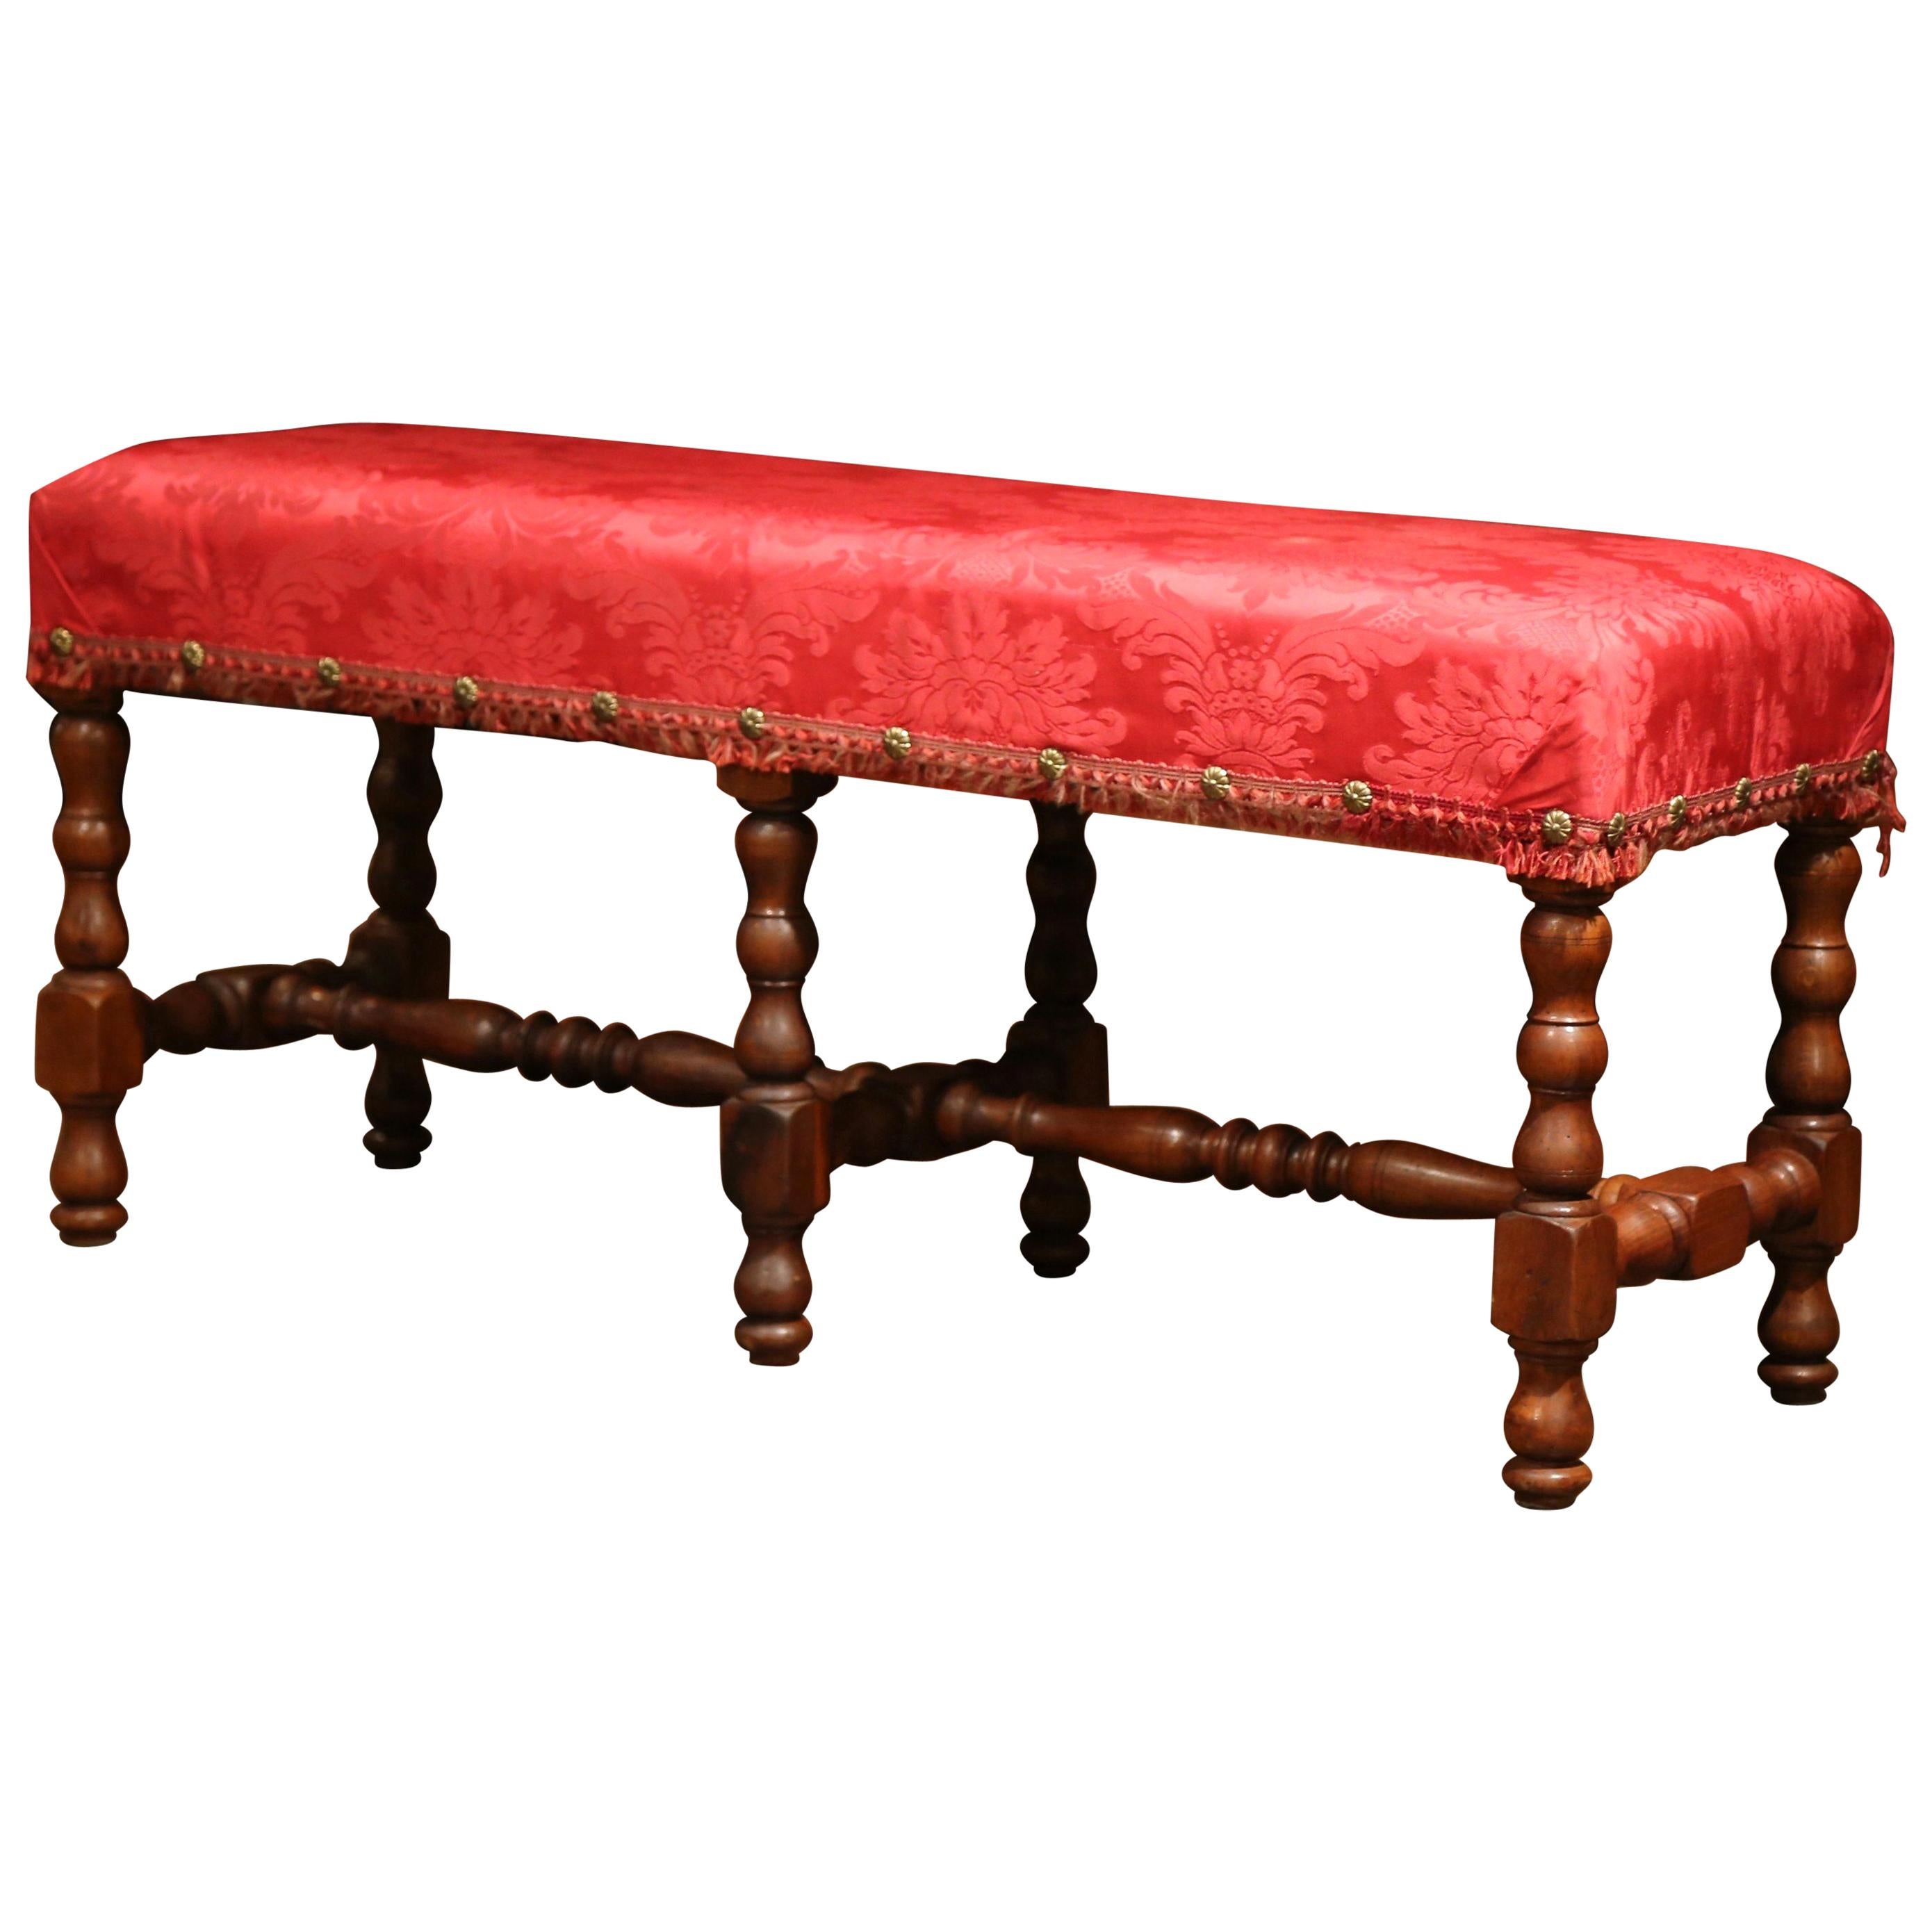 19th Century French Louis XIII Carved Walnut Bench with Red Silk Upholstery